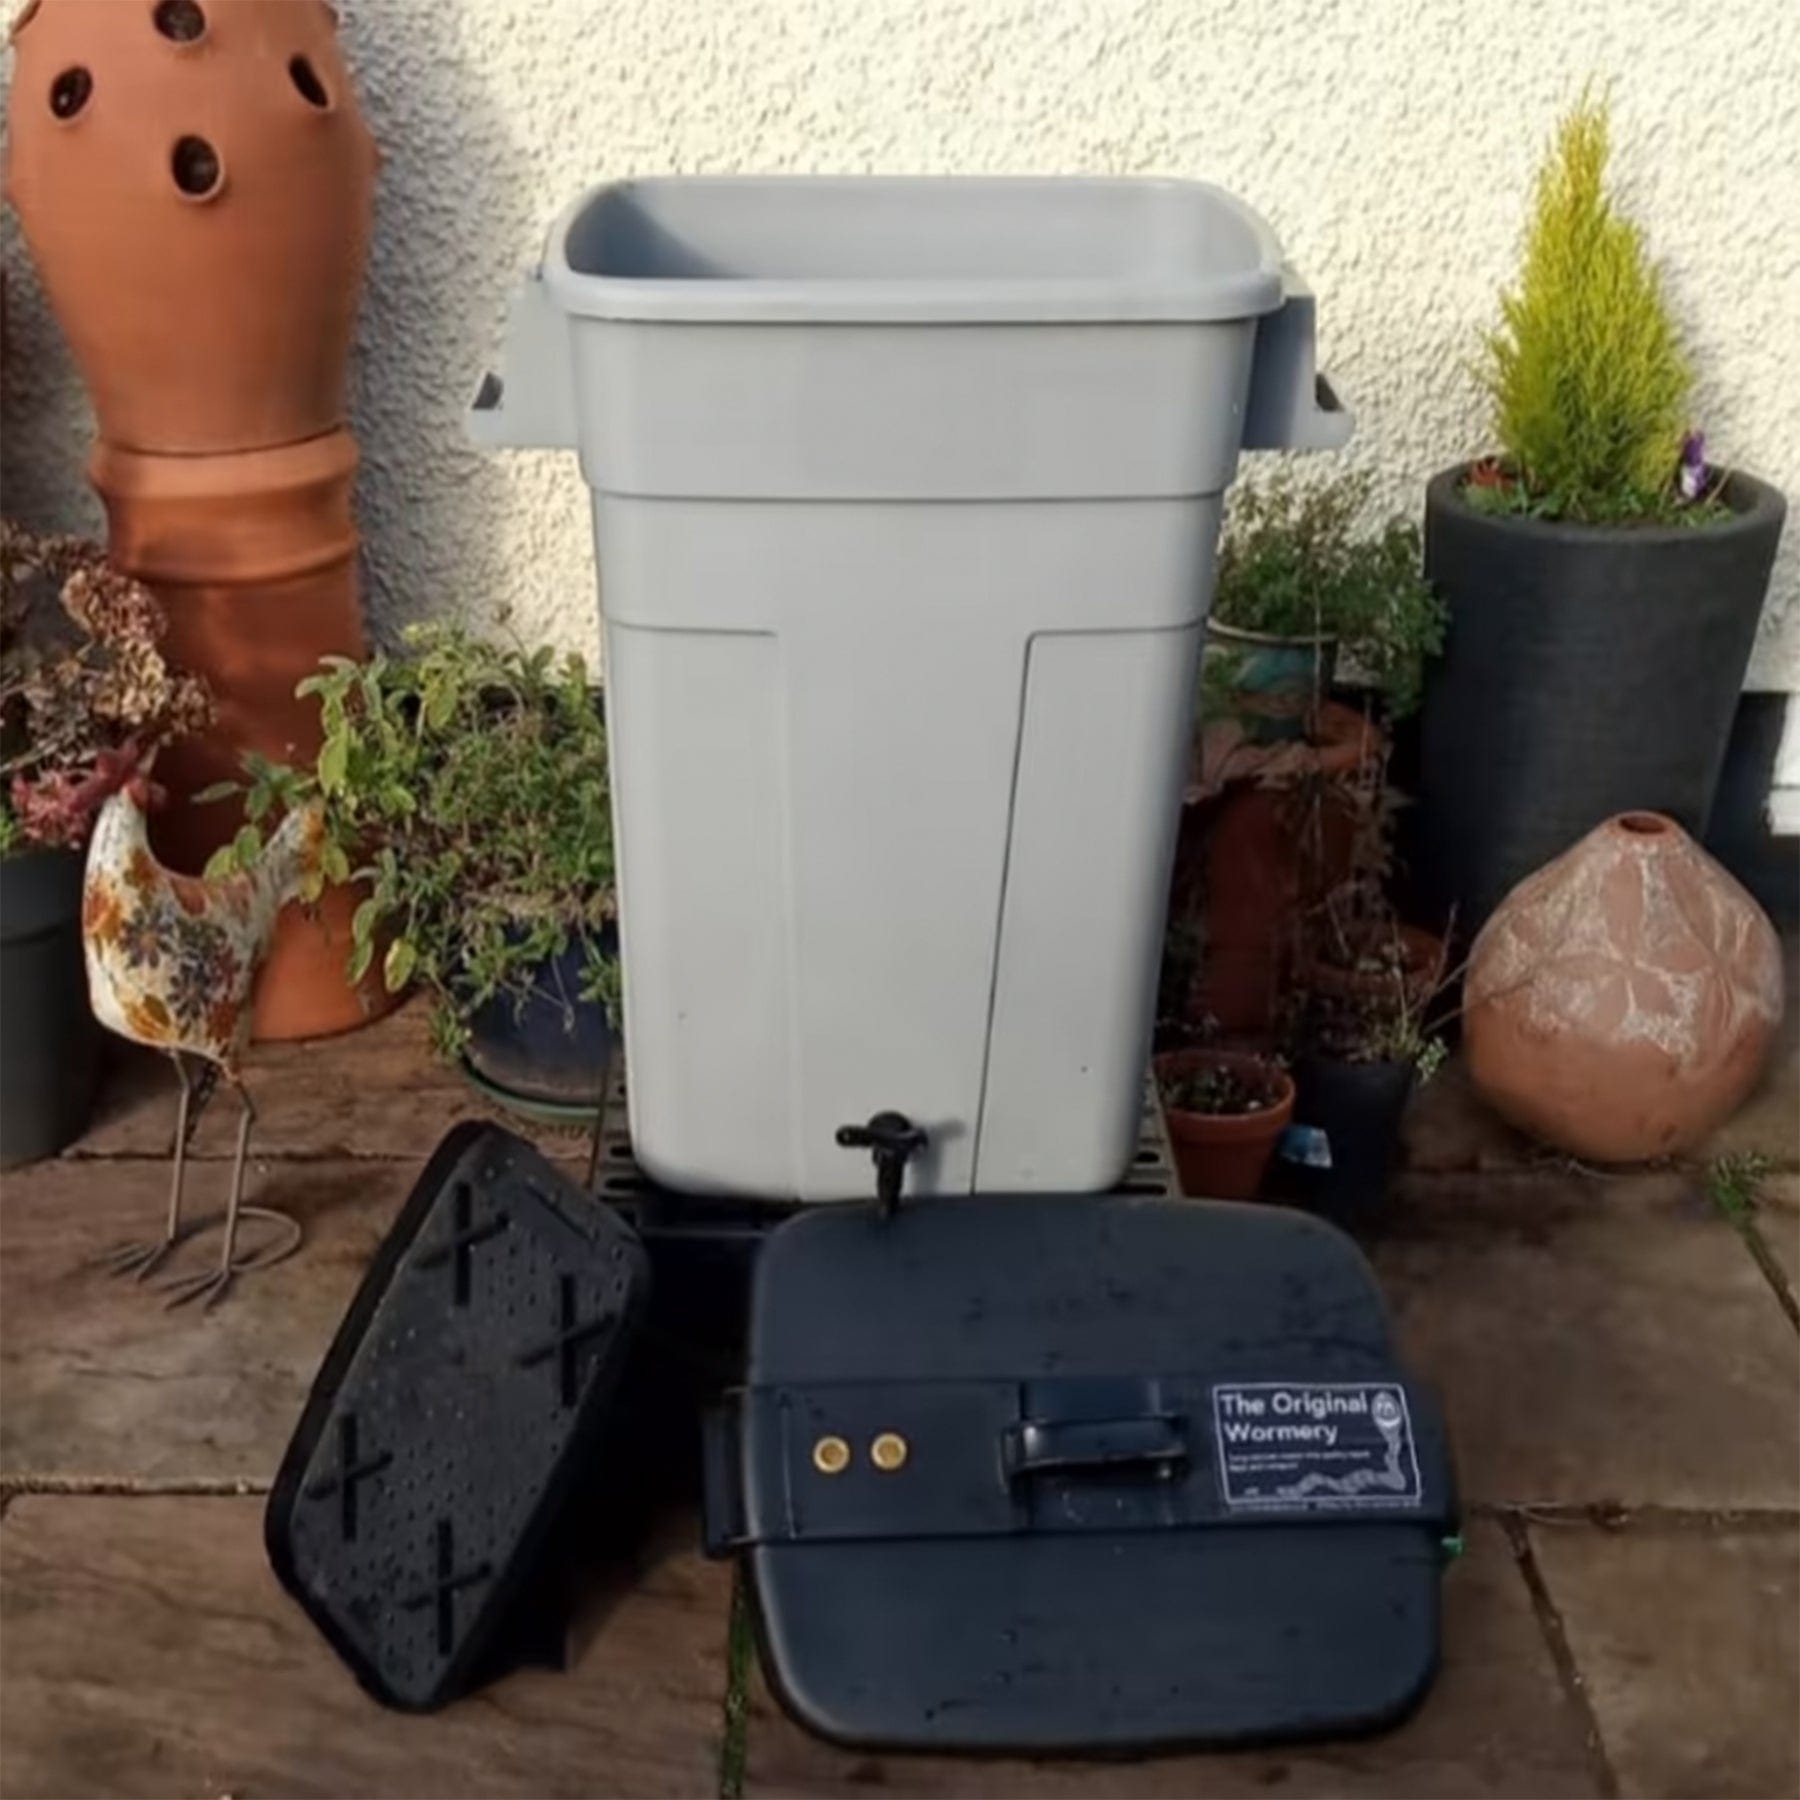 The deluxe original wormery composter kit